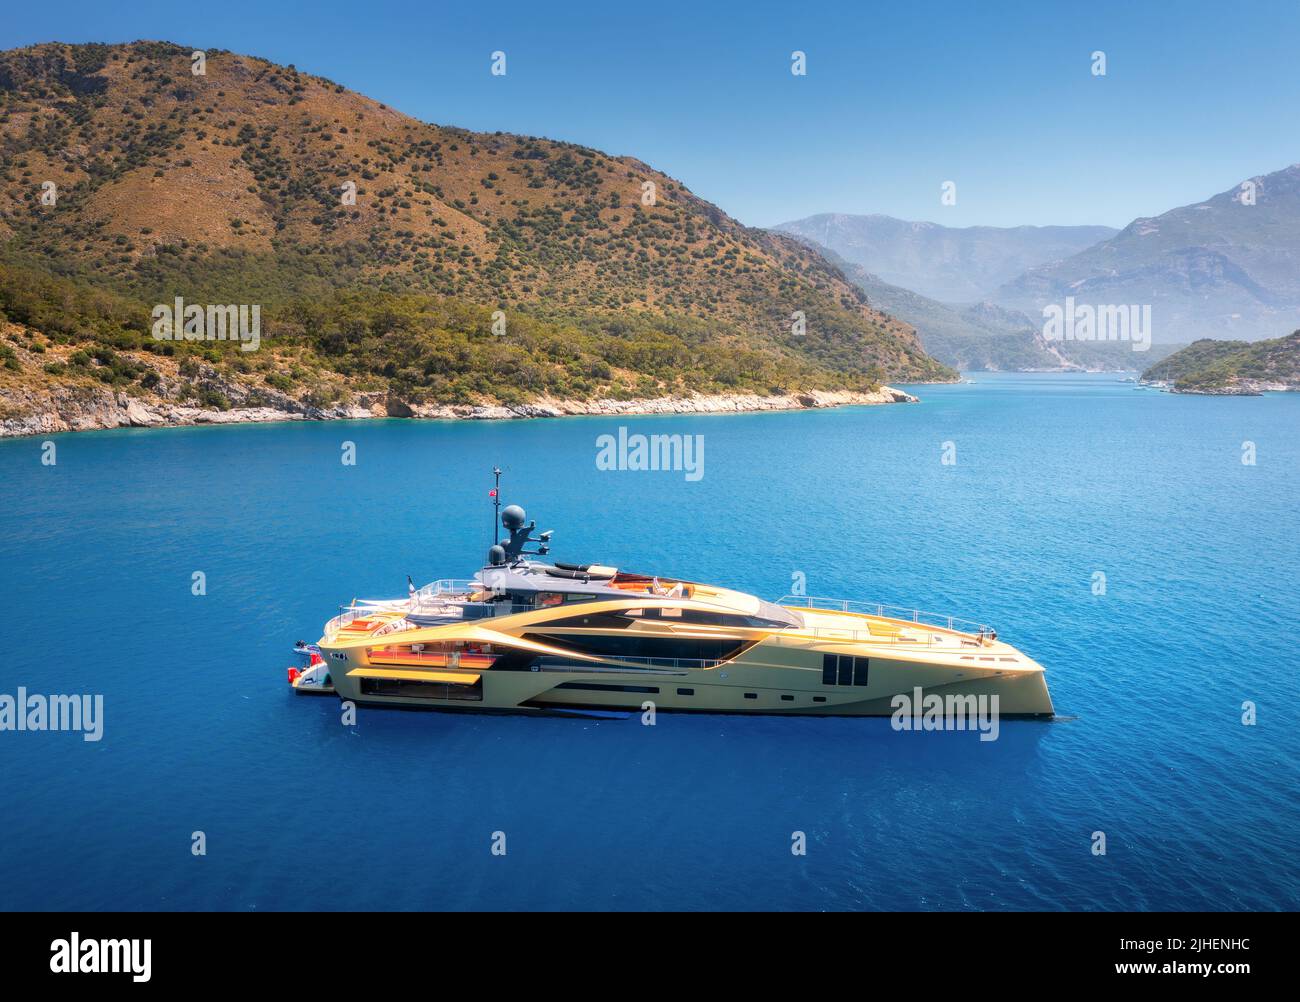 Aerial view of beautiful luxury golden yacht in blue sea Stock Photo